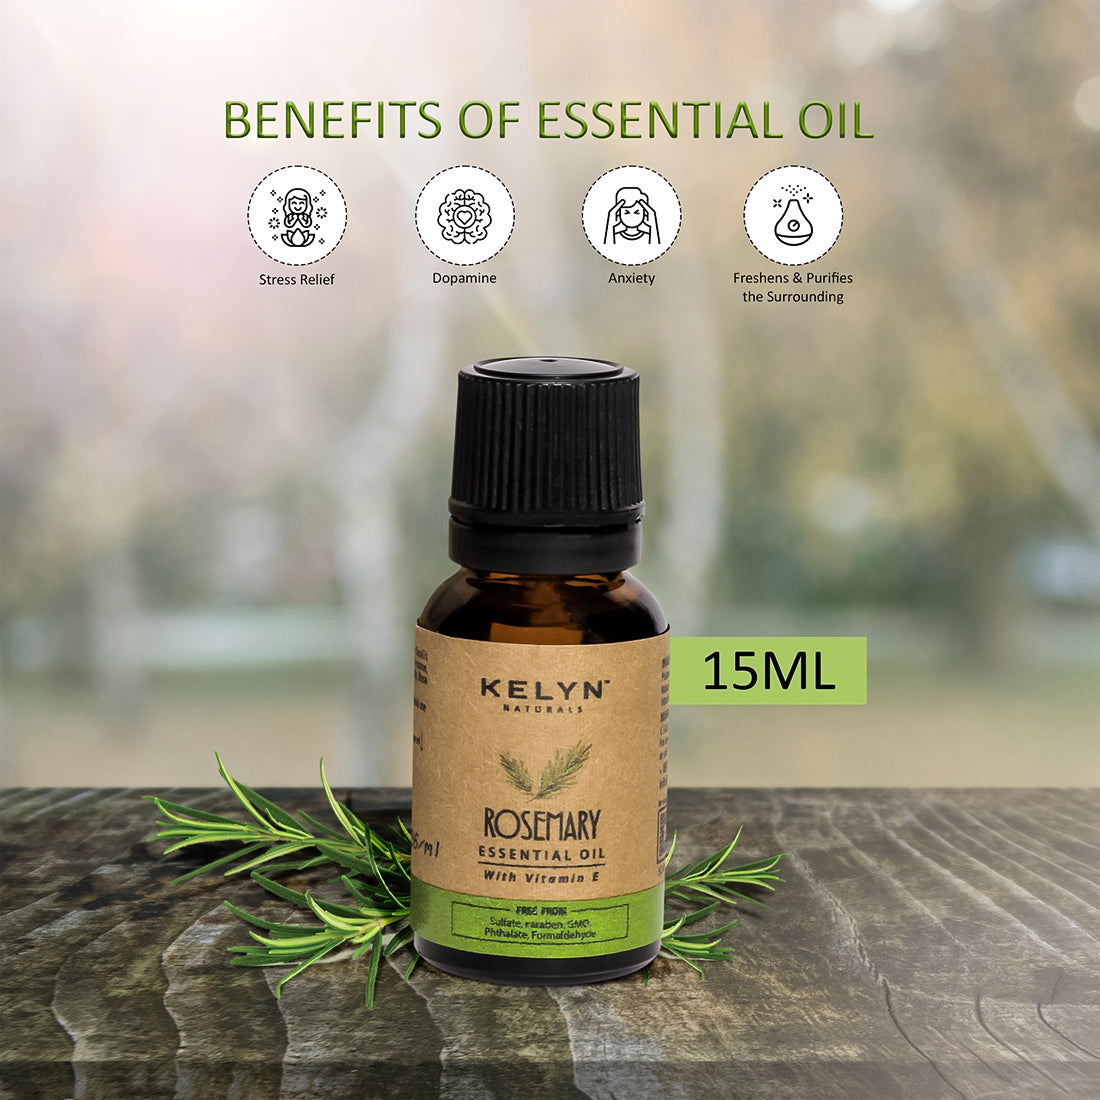 Kelyn Rosemary Essential Oil with Vitamin E - 15ml